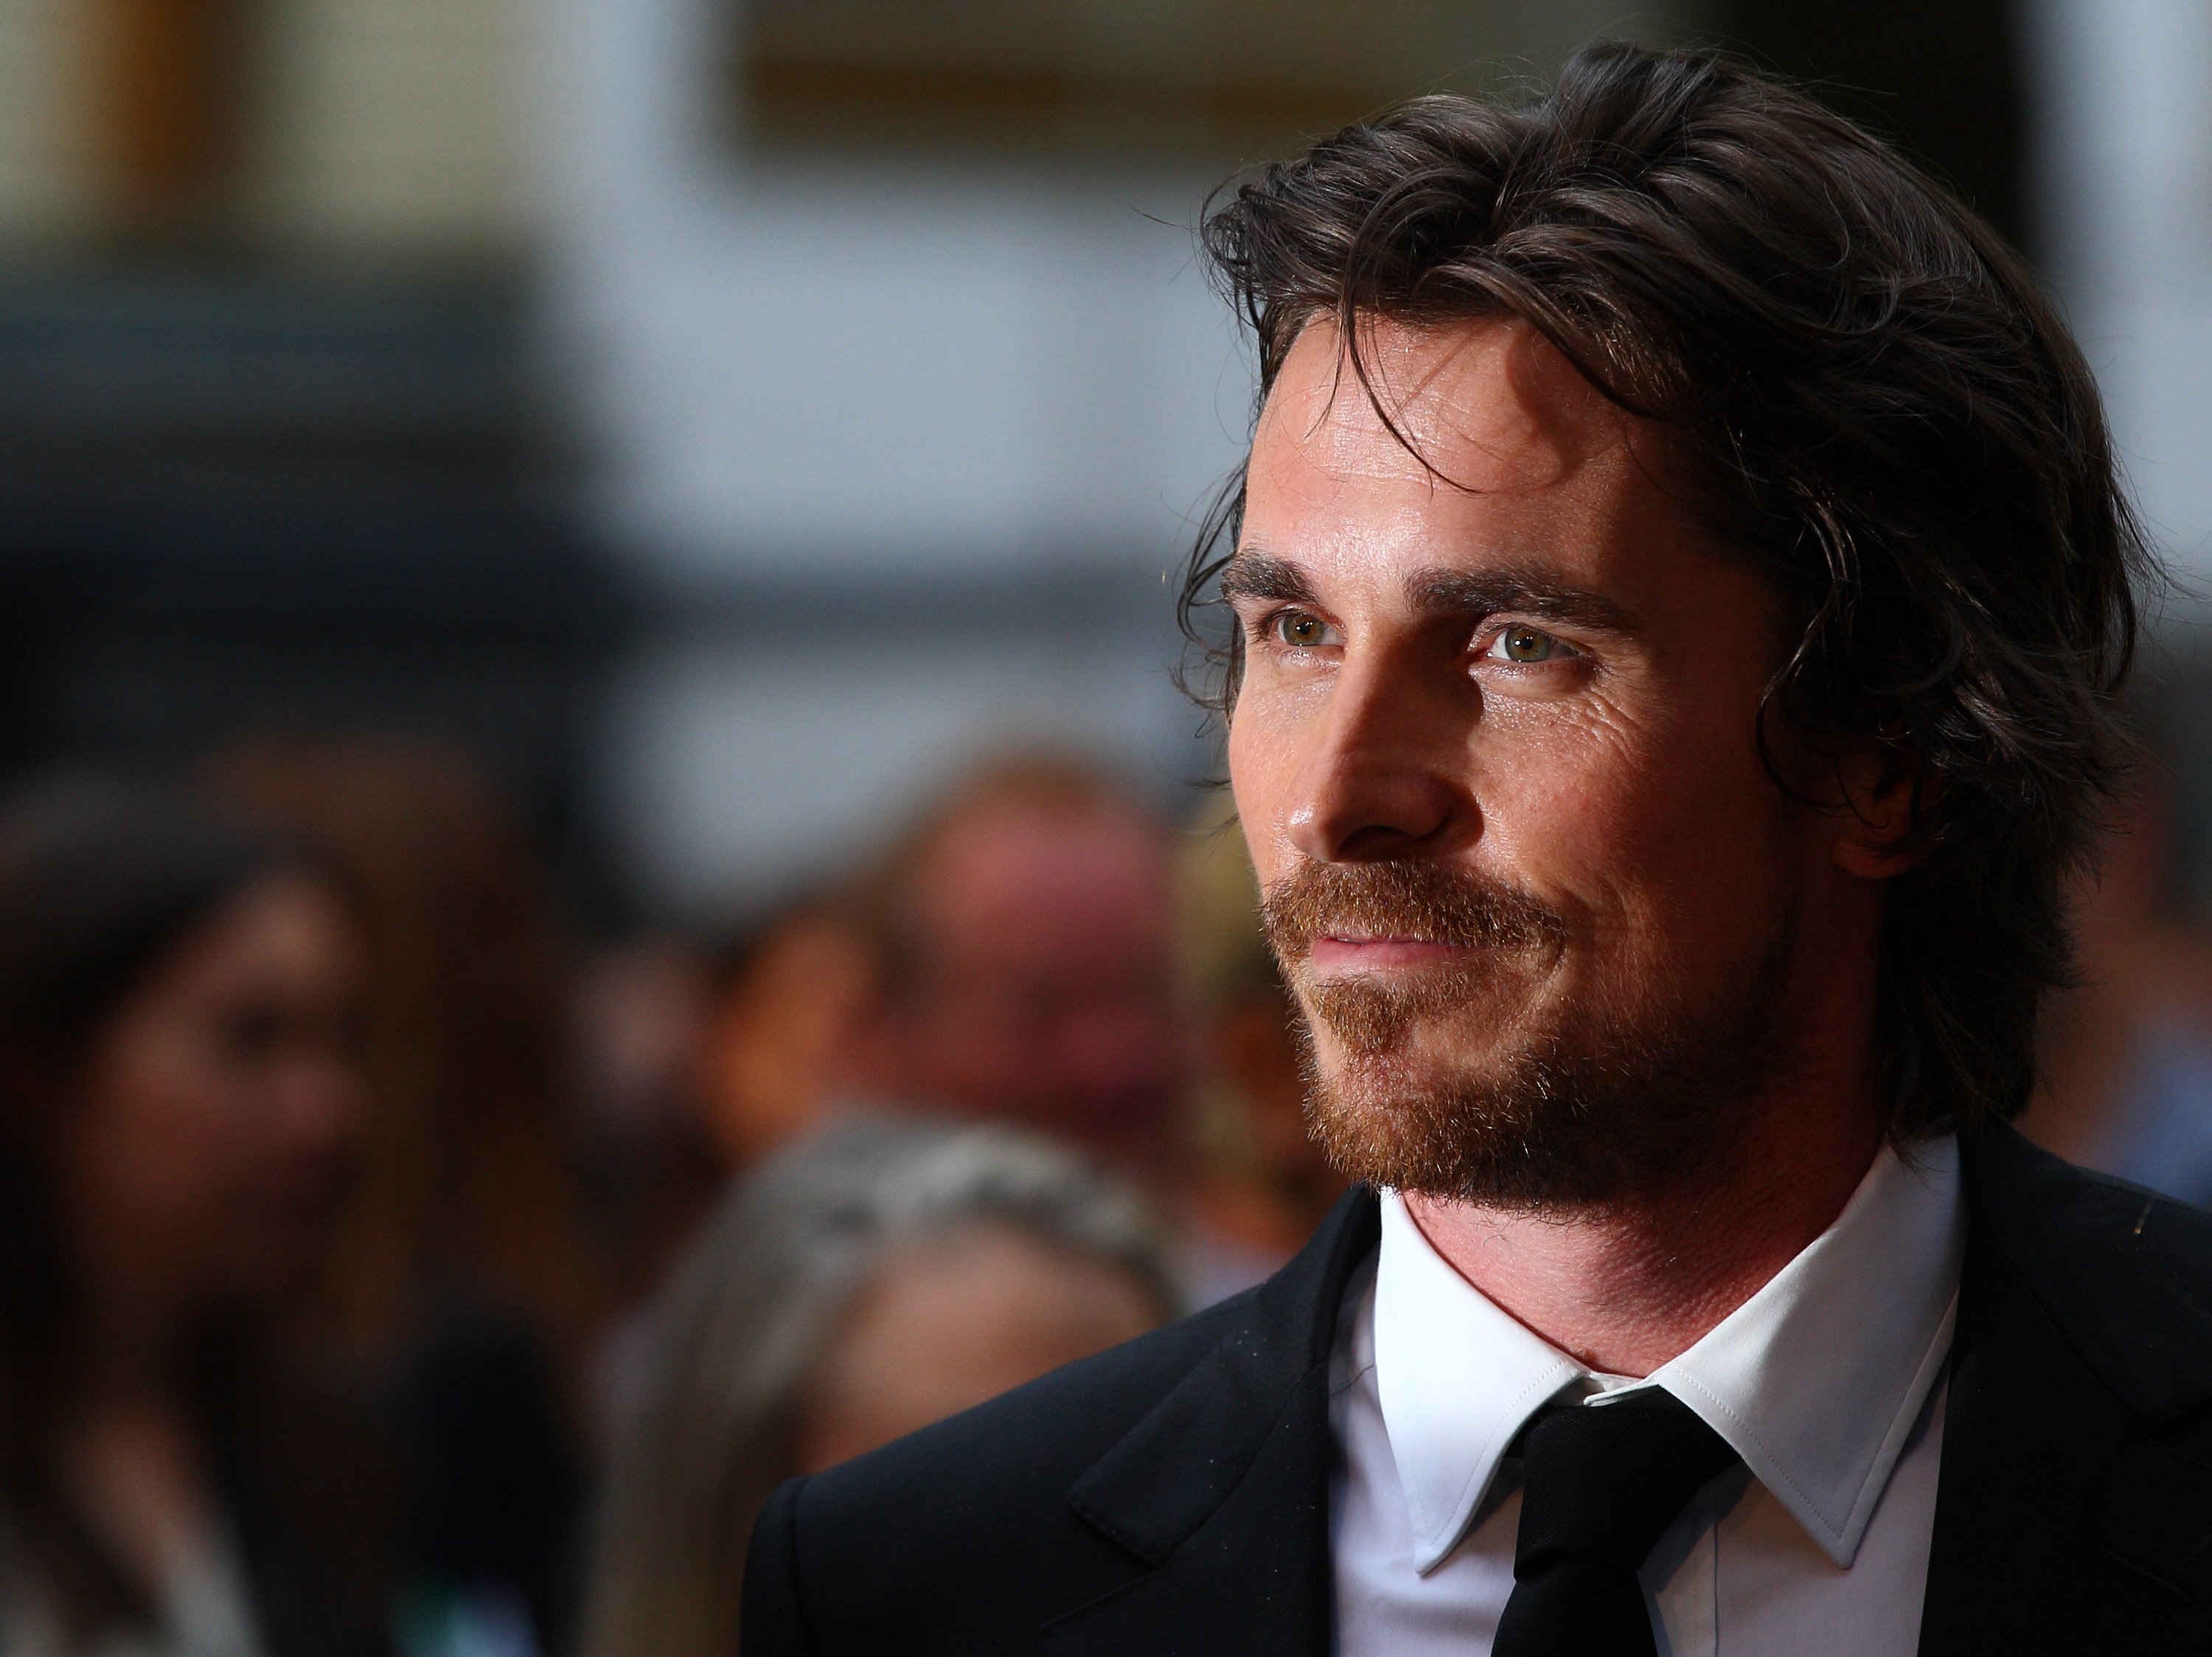 Batman actor Christian Bale attends the European premiere of The Dark Knight Rises by Christopher Nolan